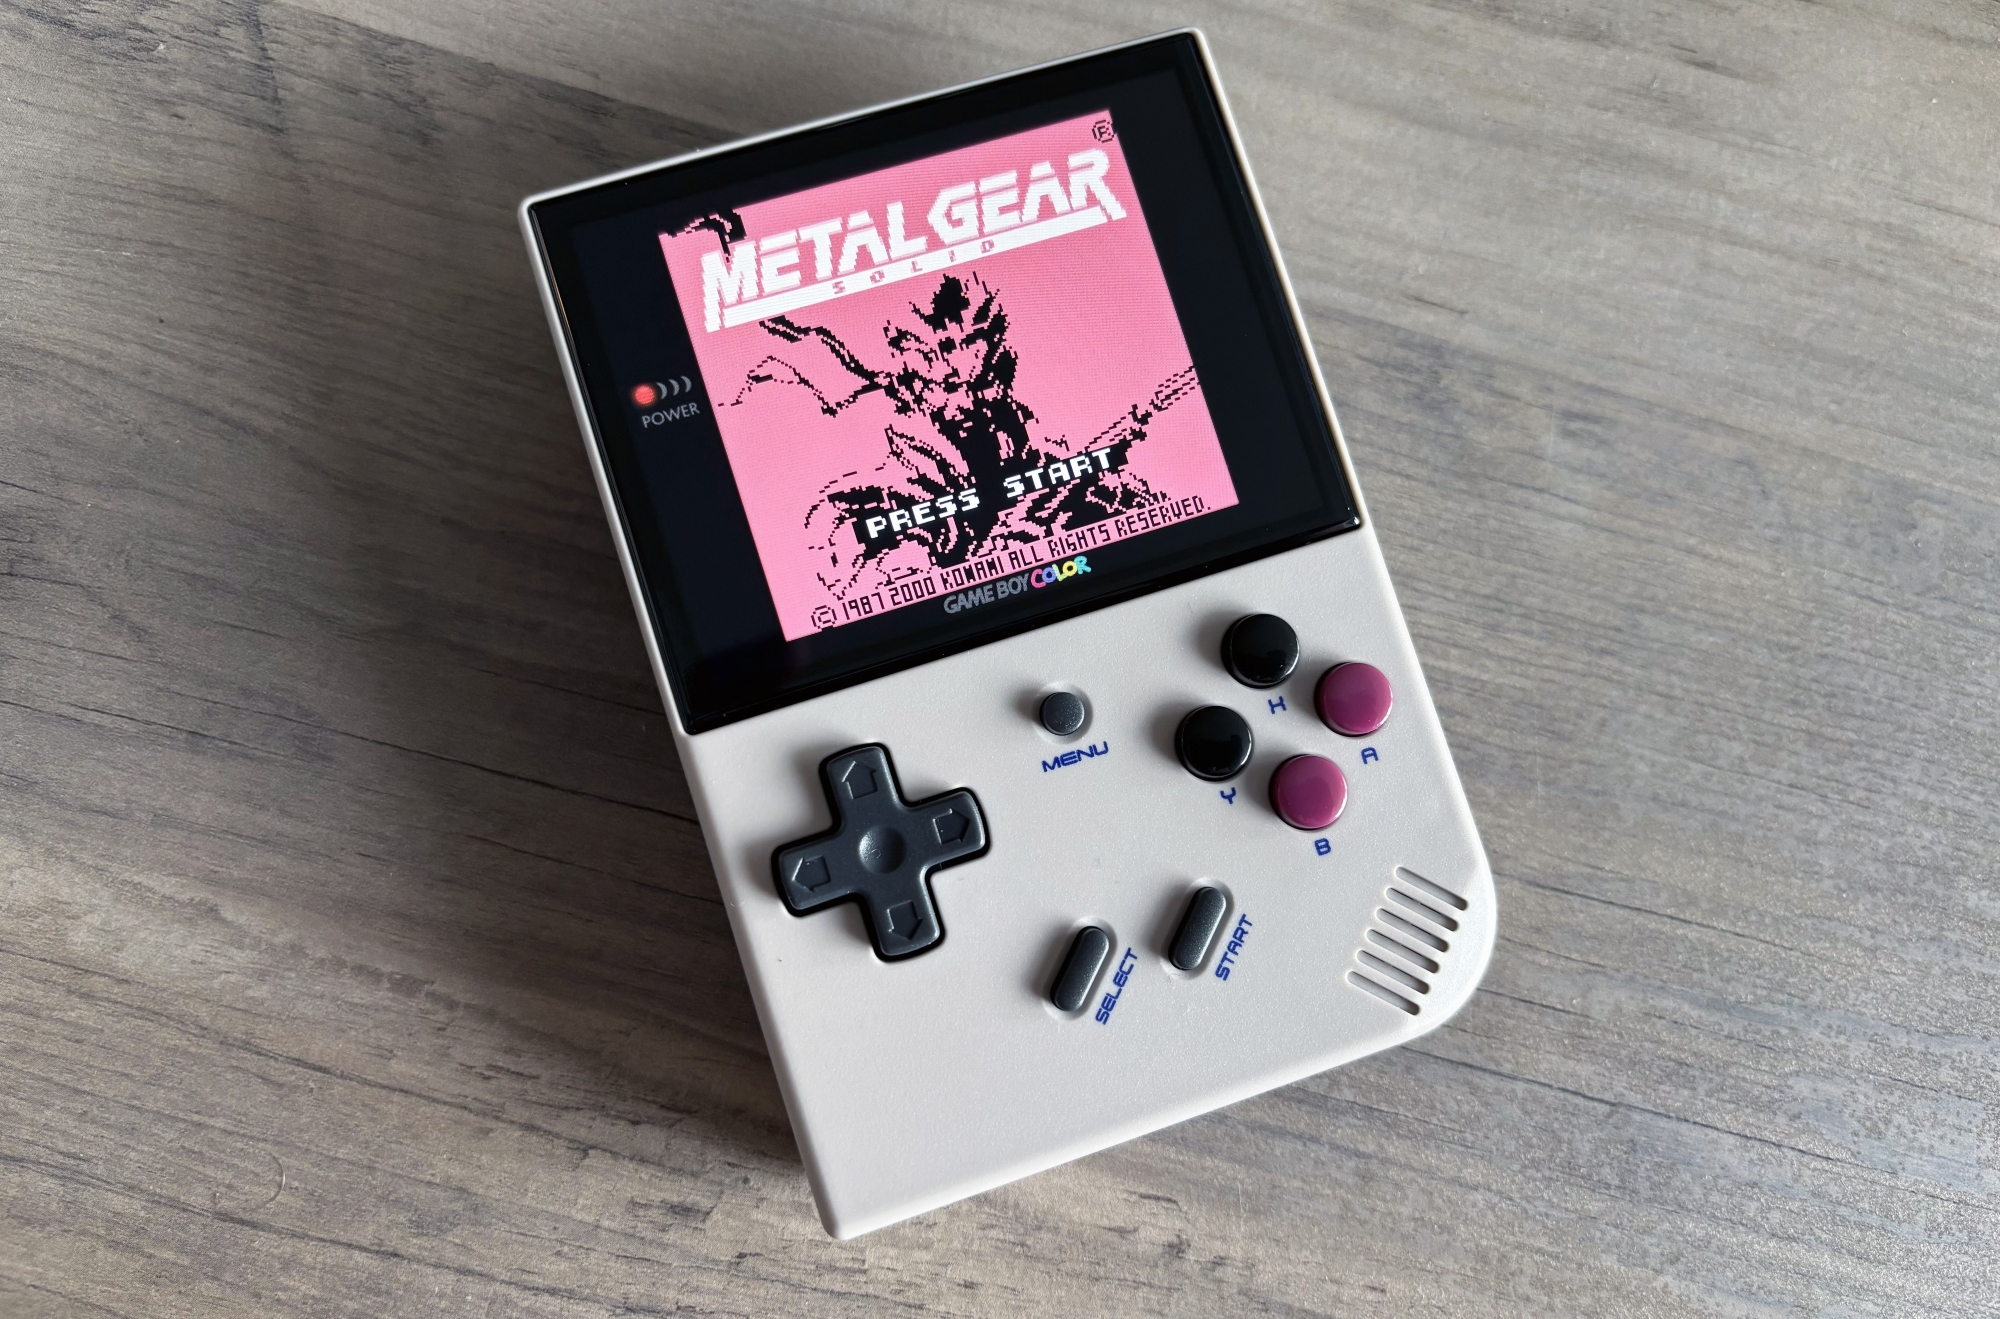 A small gaming handheld that looks reminiscent to the original Nintendo Game Boy called the Anbernic RG35XX Plus rests at an angle on a light brown wooden table. The display is turned on and showcases the start screen from the Game Boy game Metal Gear Solid.